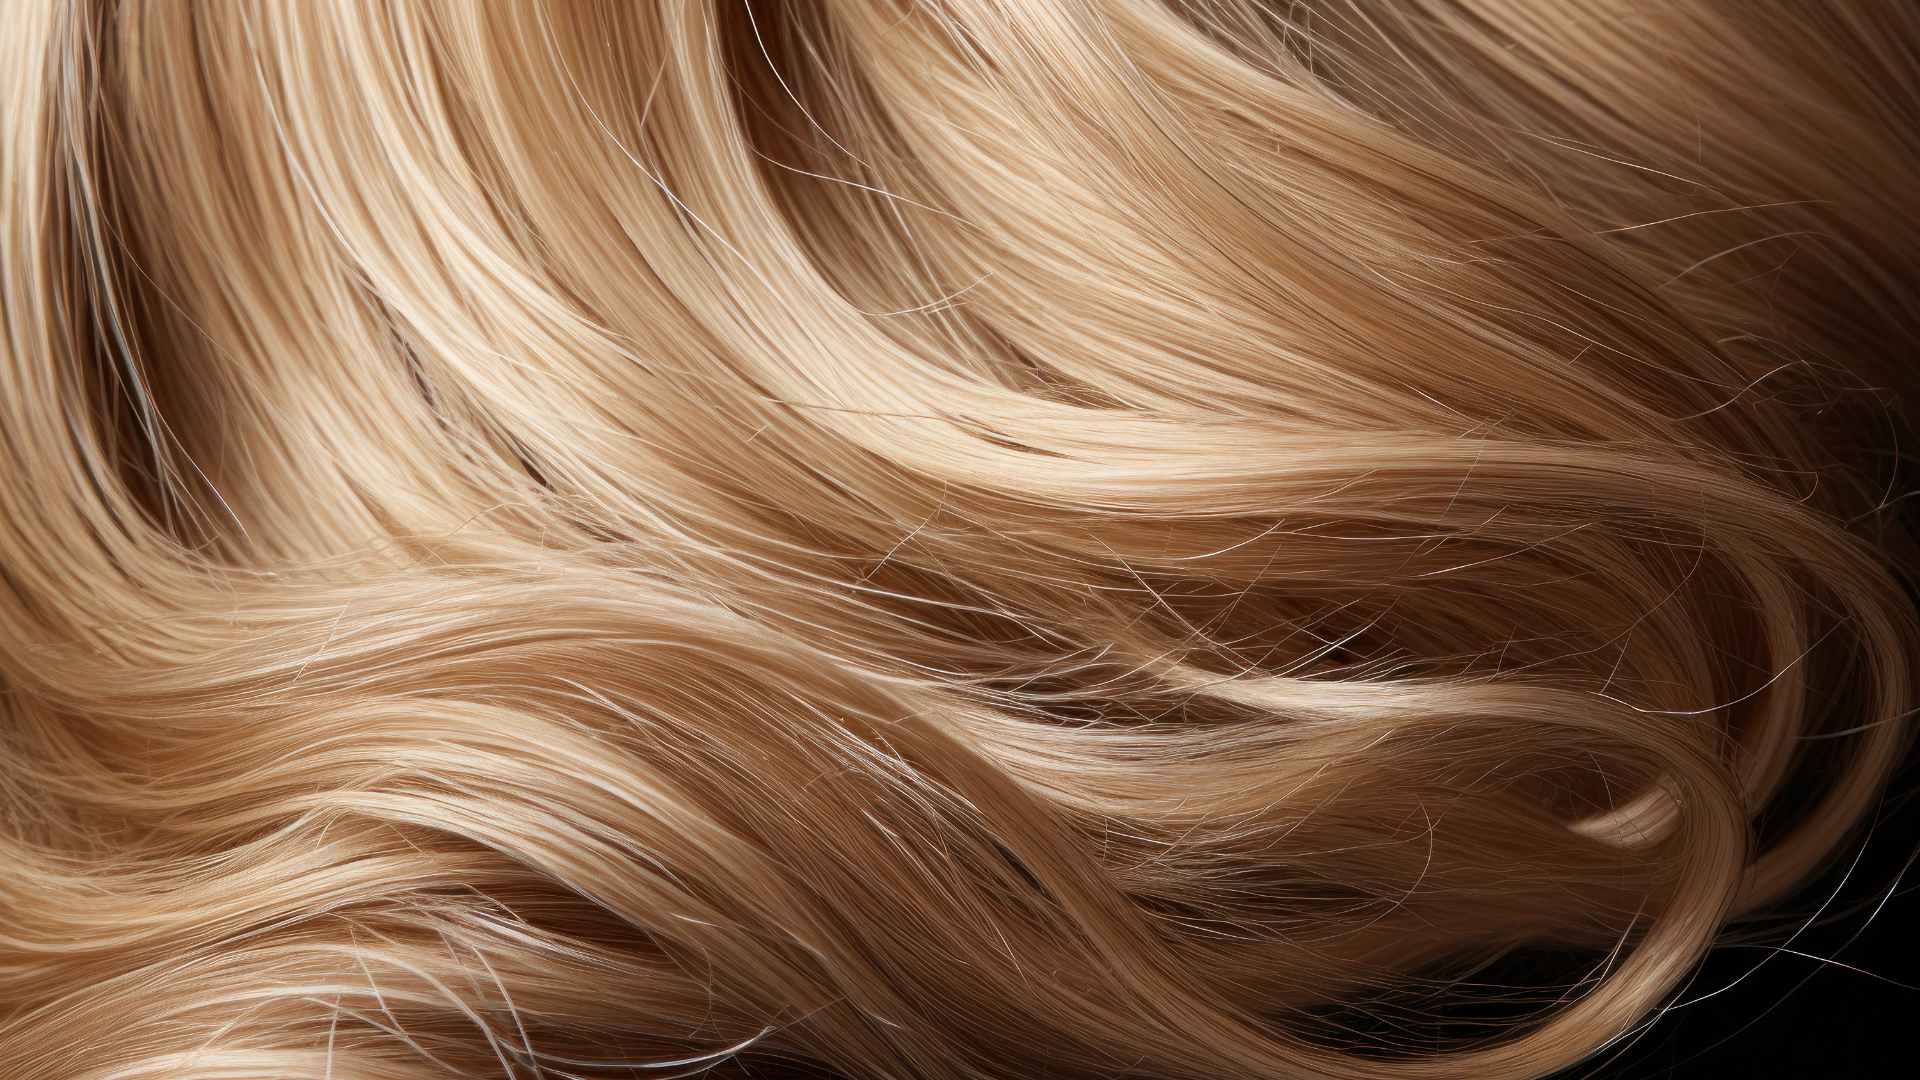 Smooth shiny hair without split ends